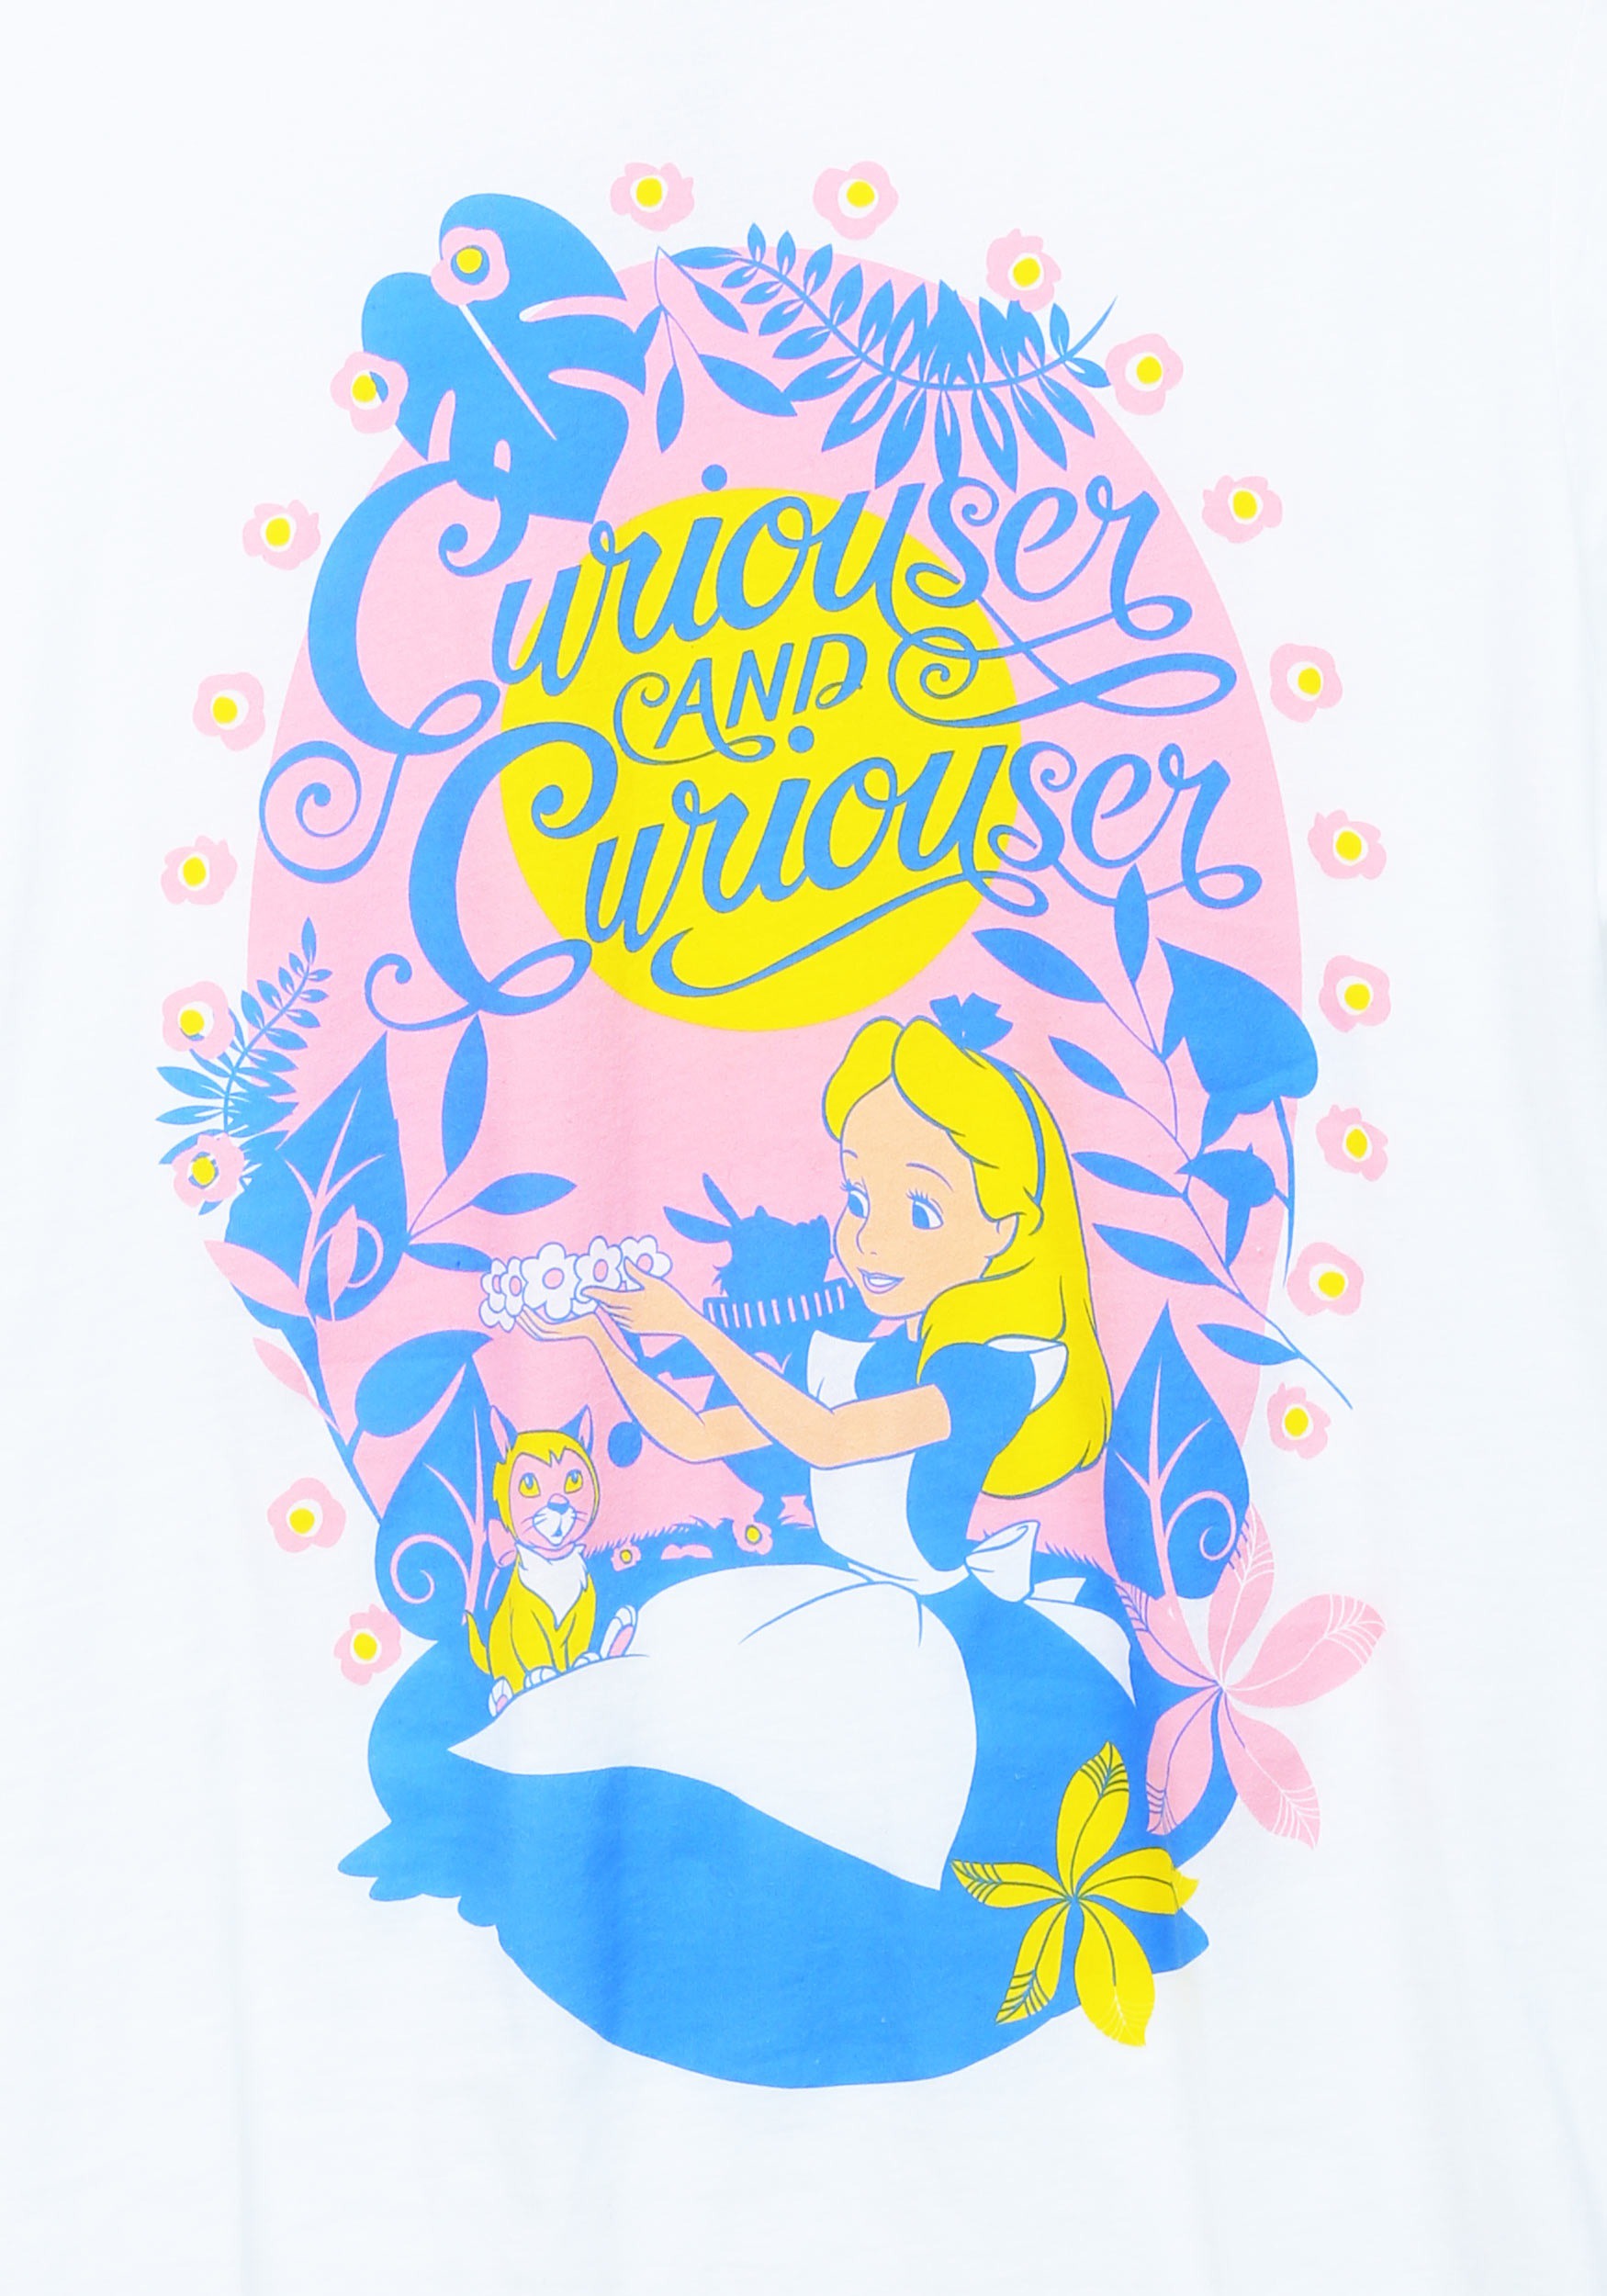 /Curiouser and Curiouser - Alice In Wonderland & Through 